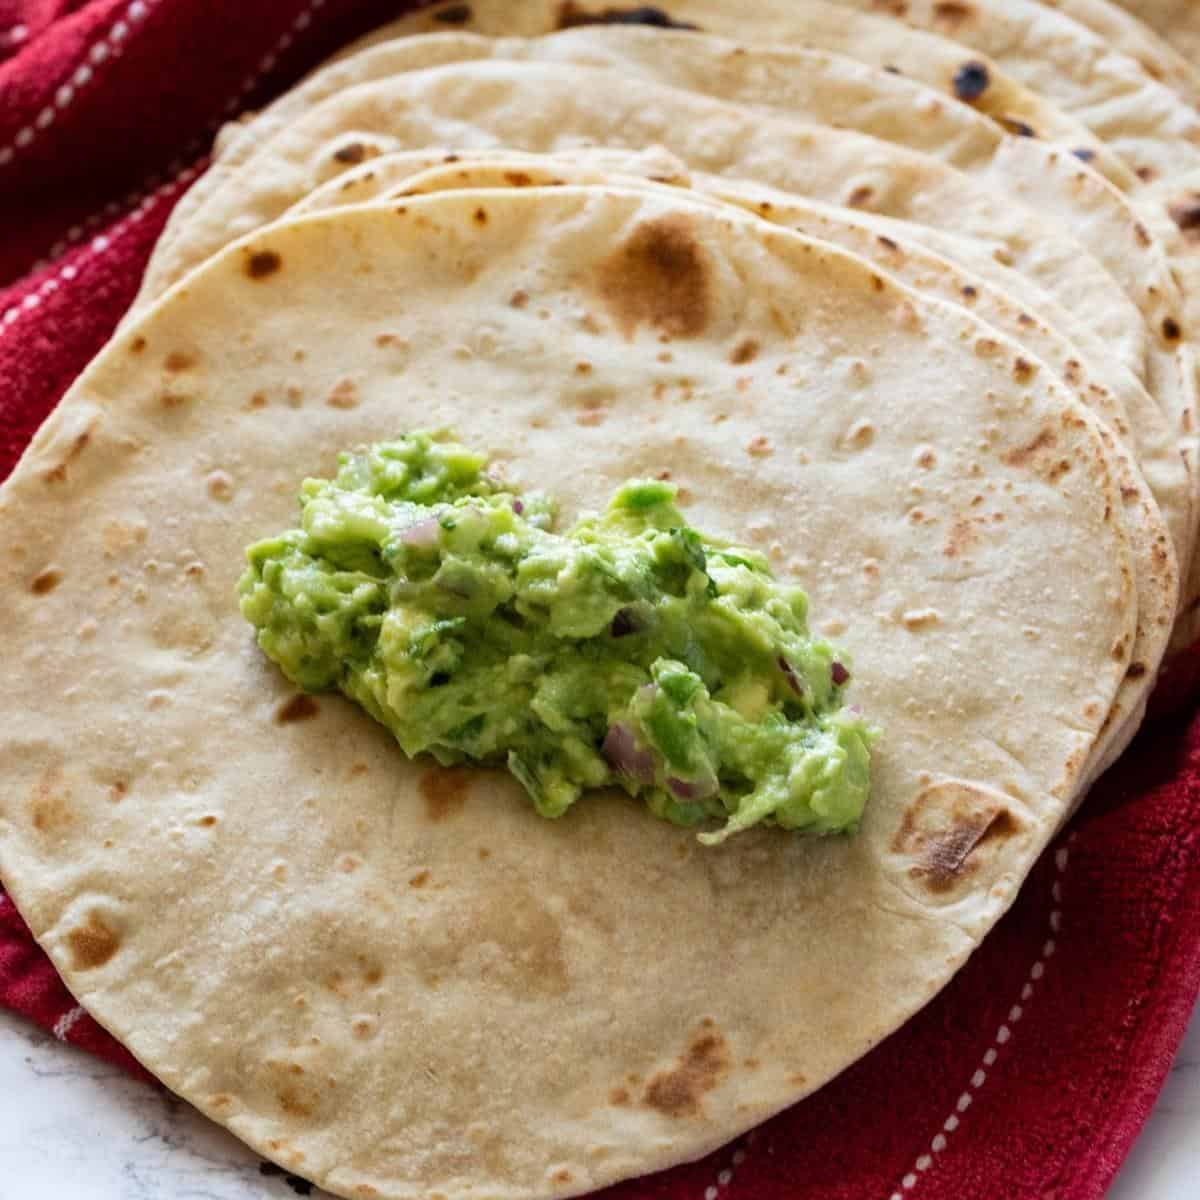 Stack of tortillas with guacamole on top.